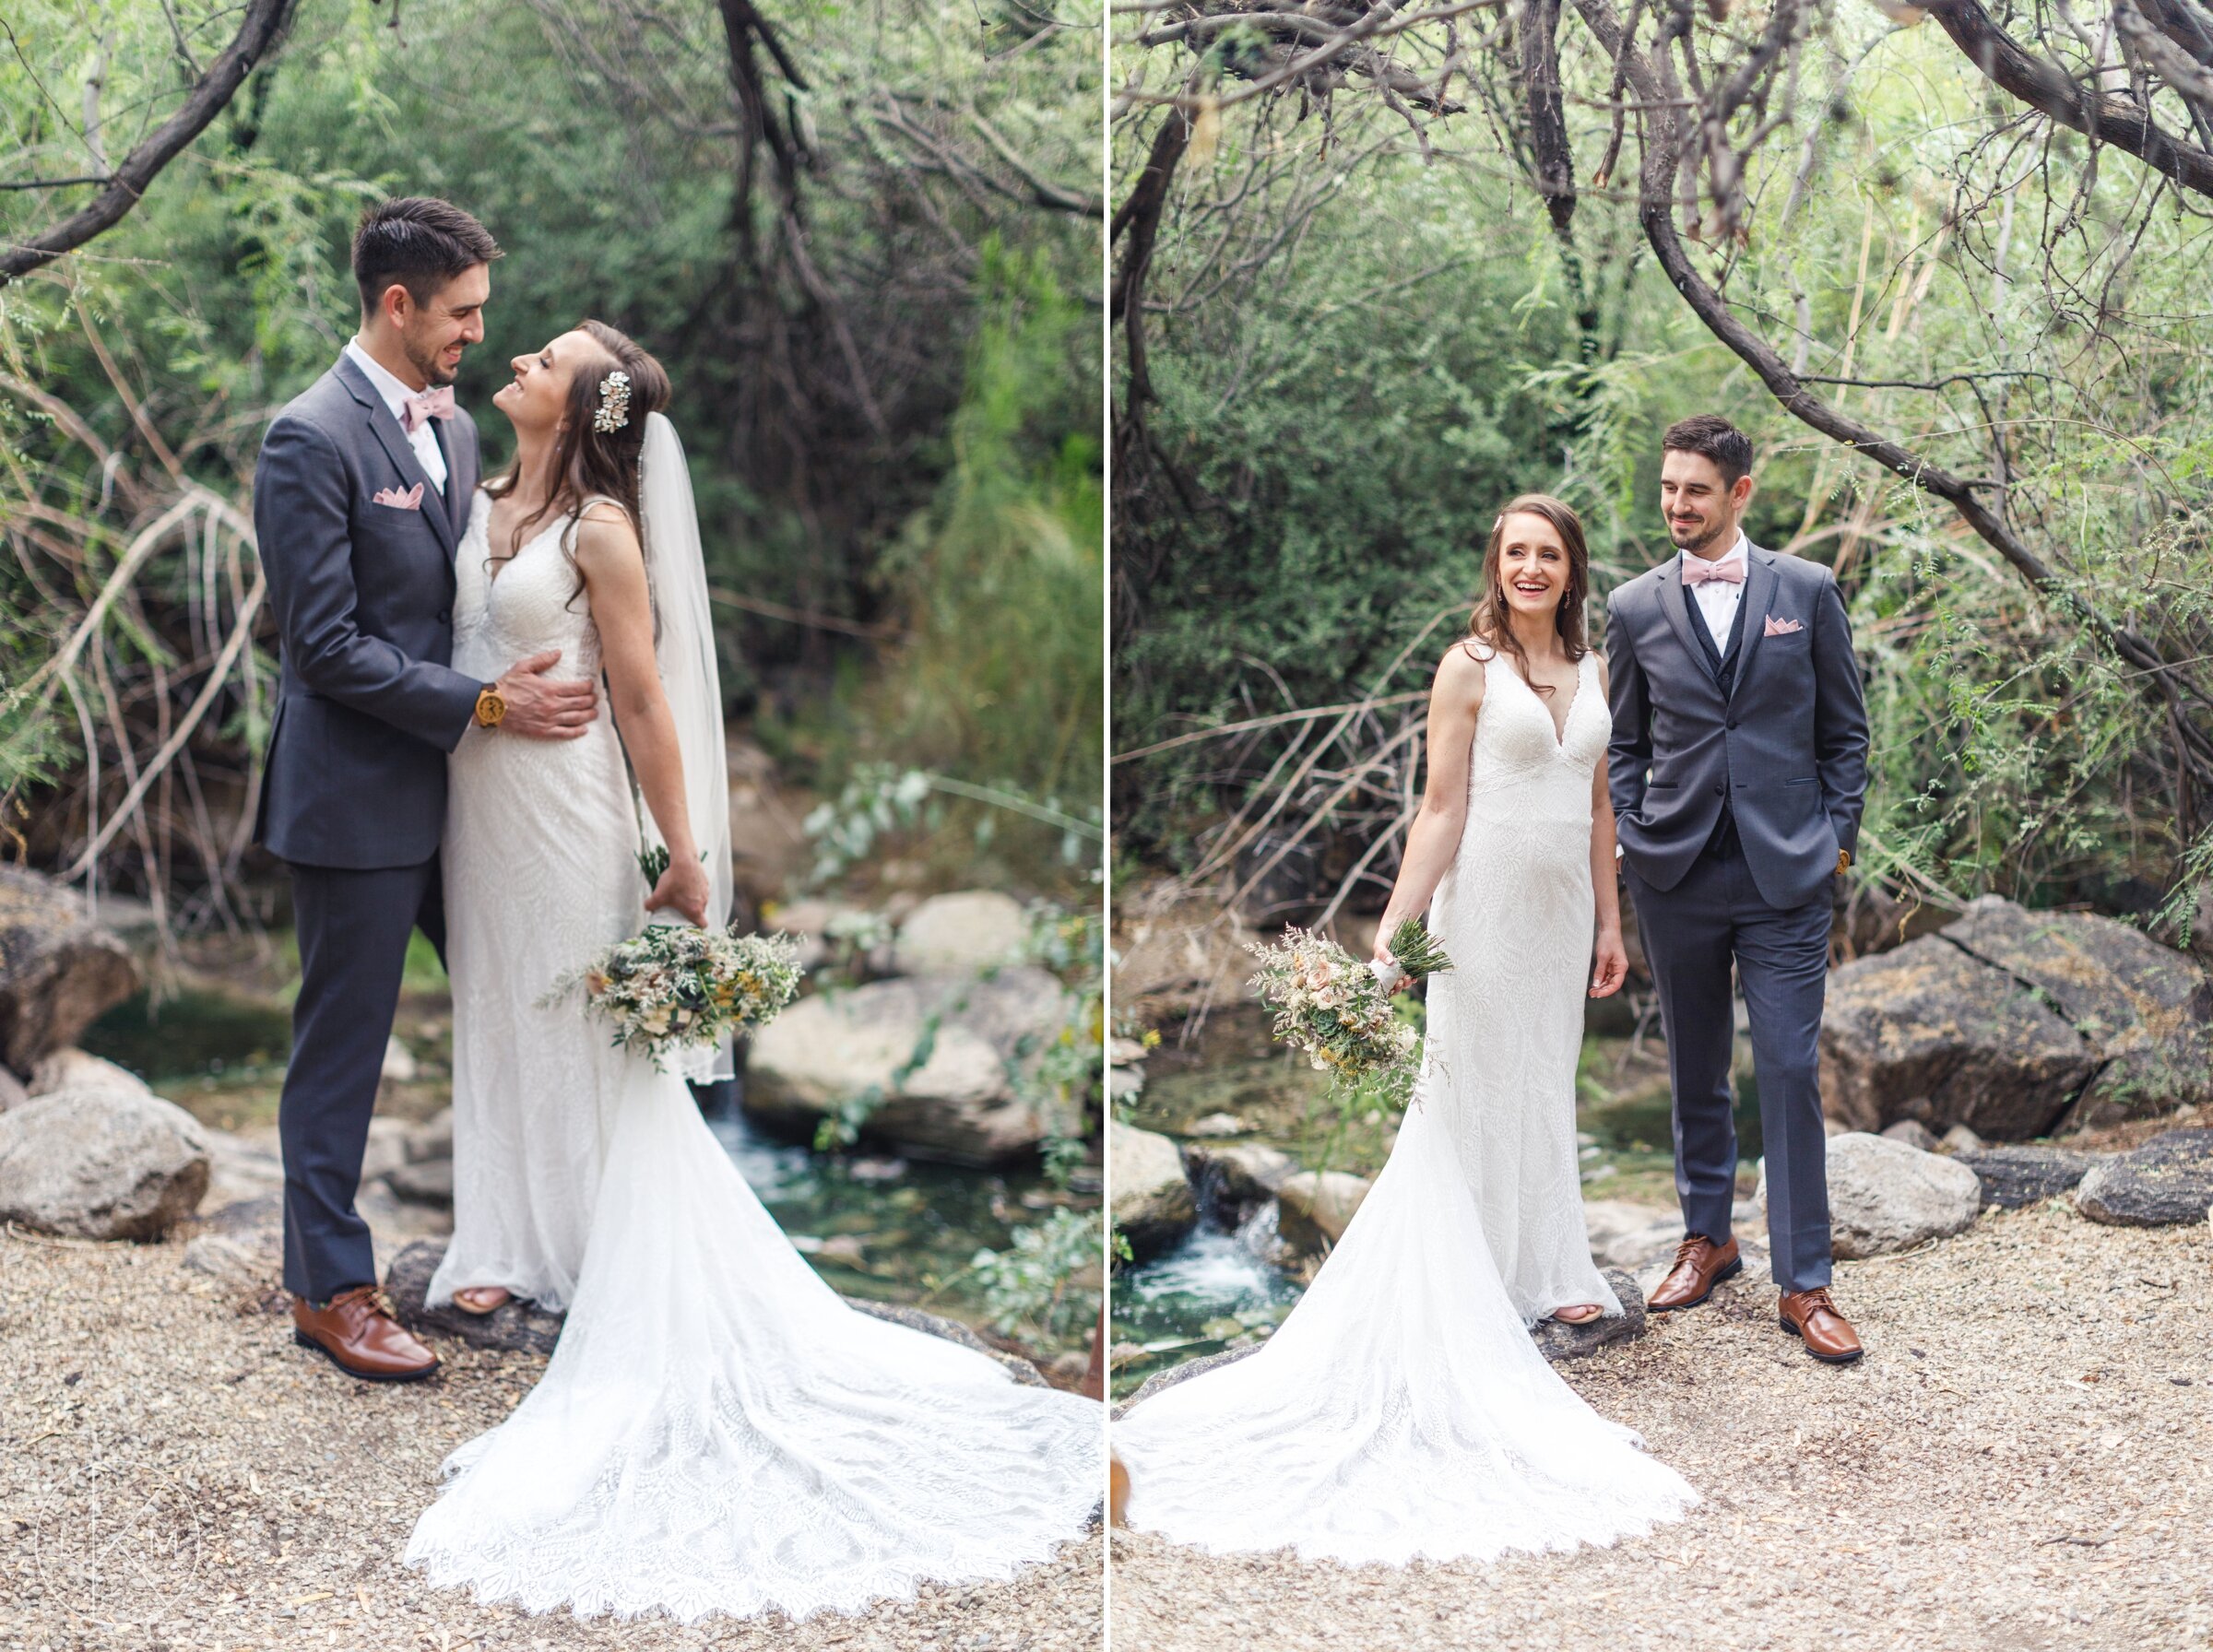 20_09_12_CLUTTER_LOWES_VENTANA_CANYON_WEDDING-PICTURES_laura-k-moore-photography 10.jpg